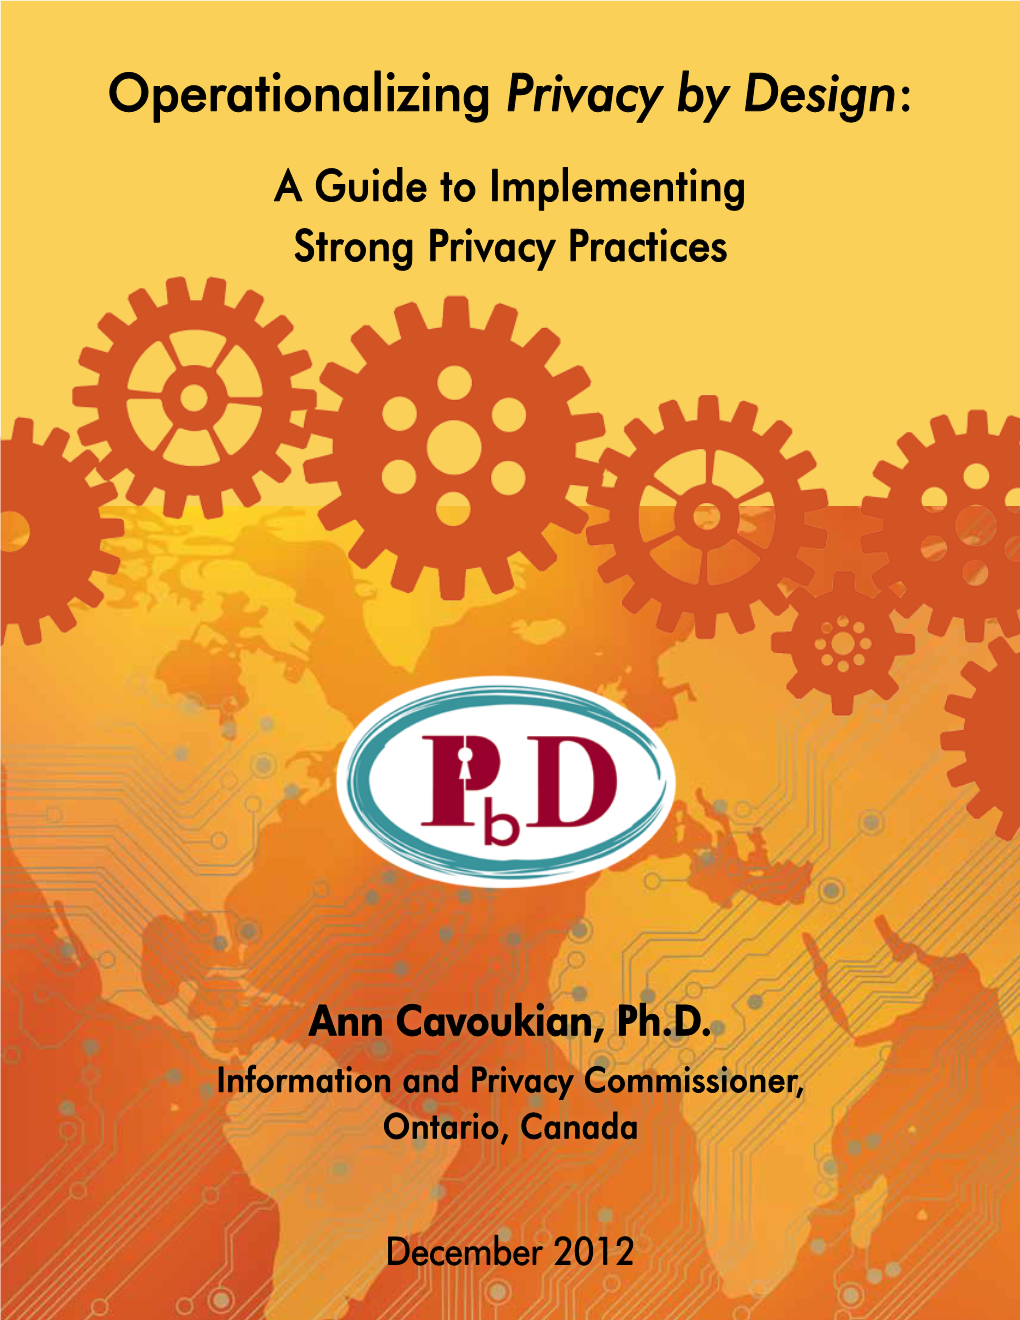 Operationalizing Privacy by Design: a Guide to Implementing Strong Privacy Practices